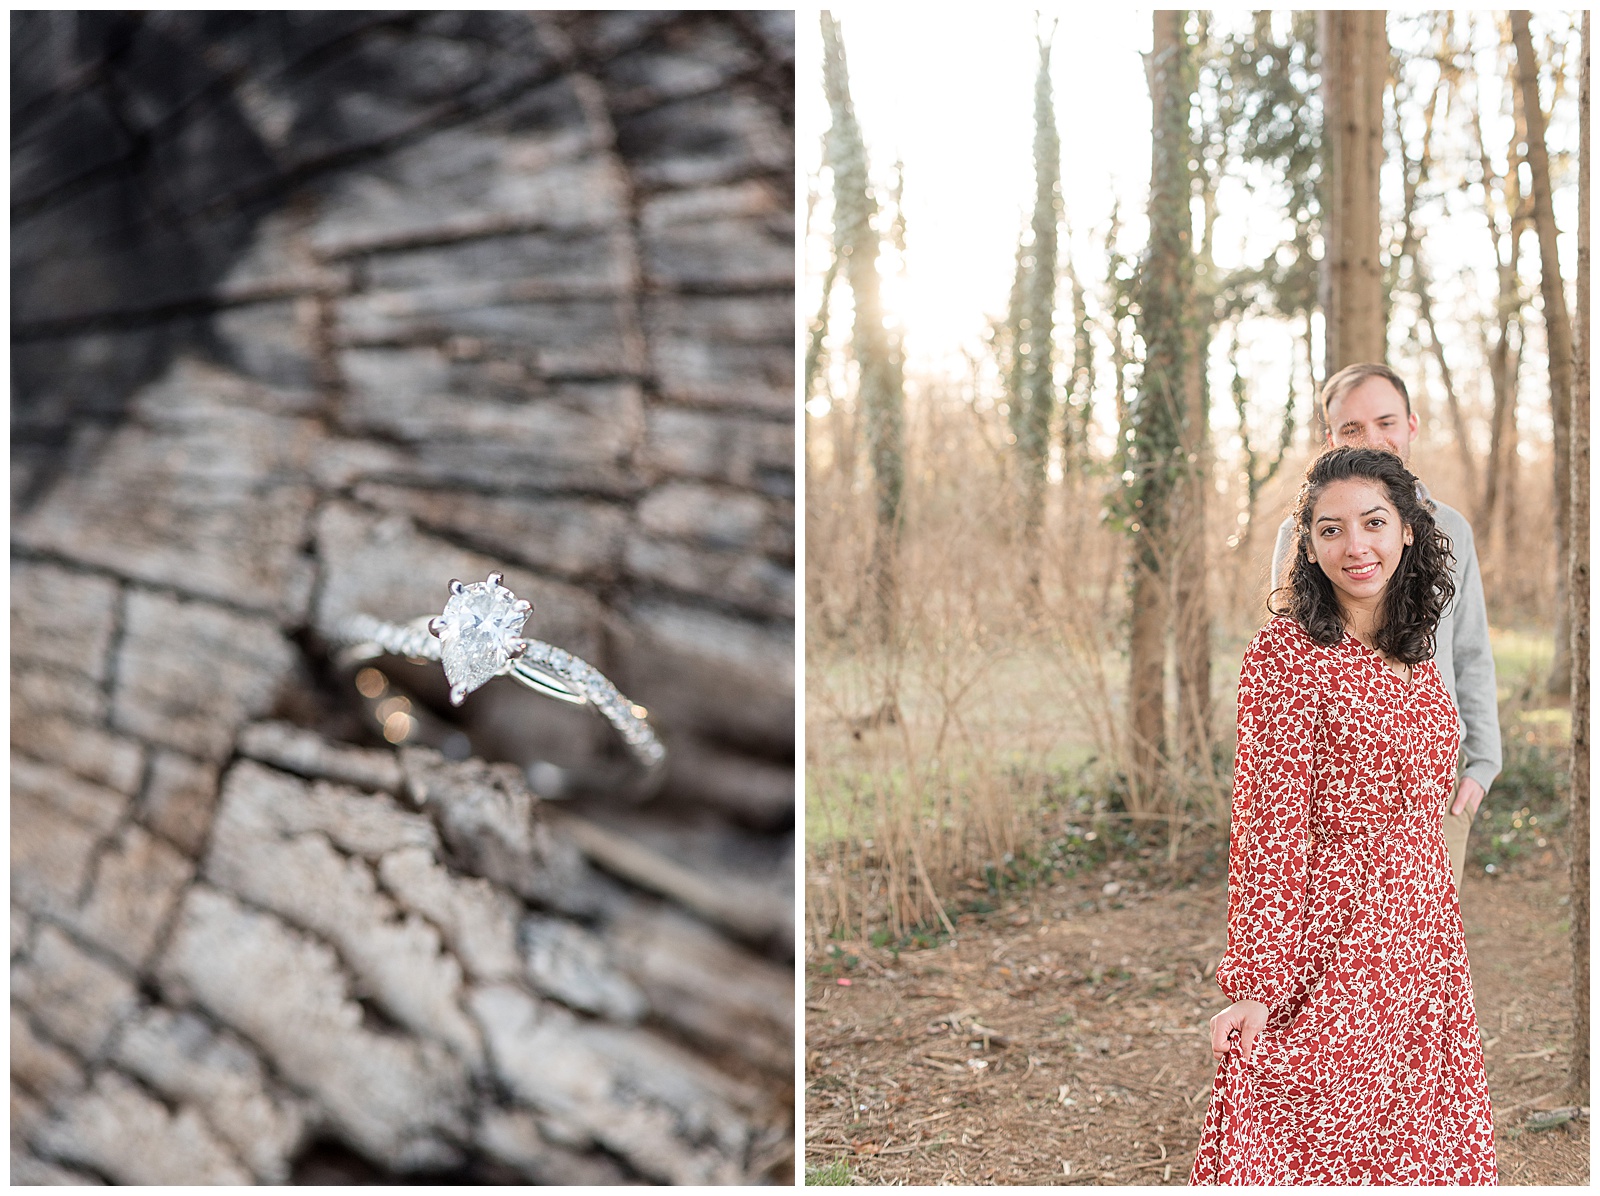 diamond engagement ring displayed in tree stump during engagement session